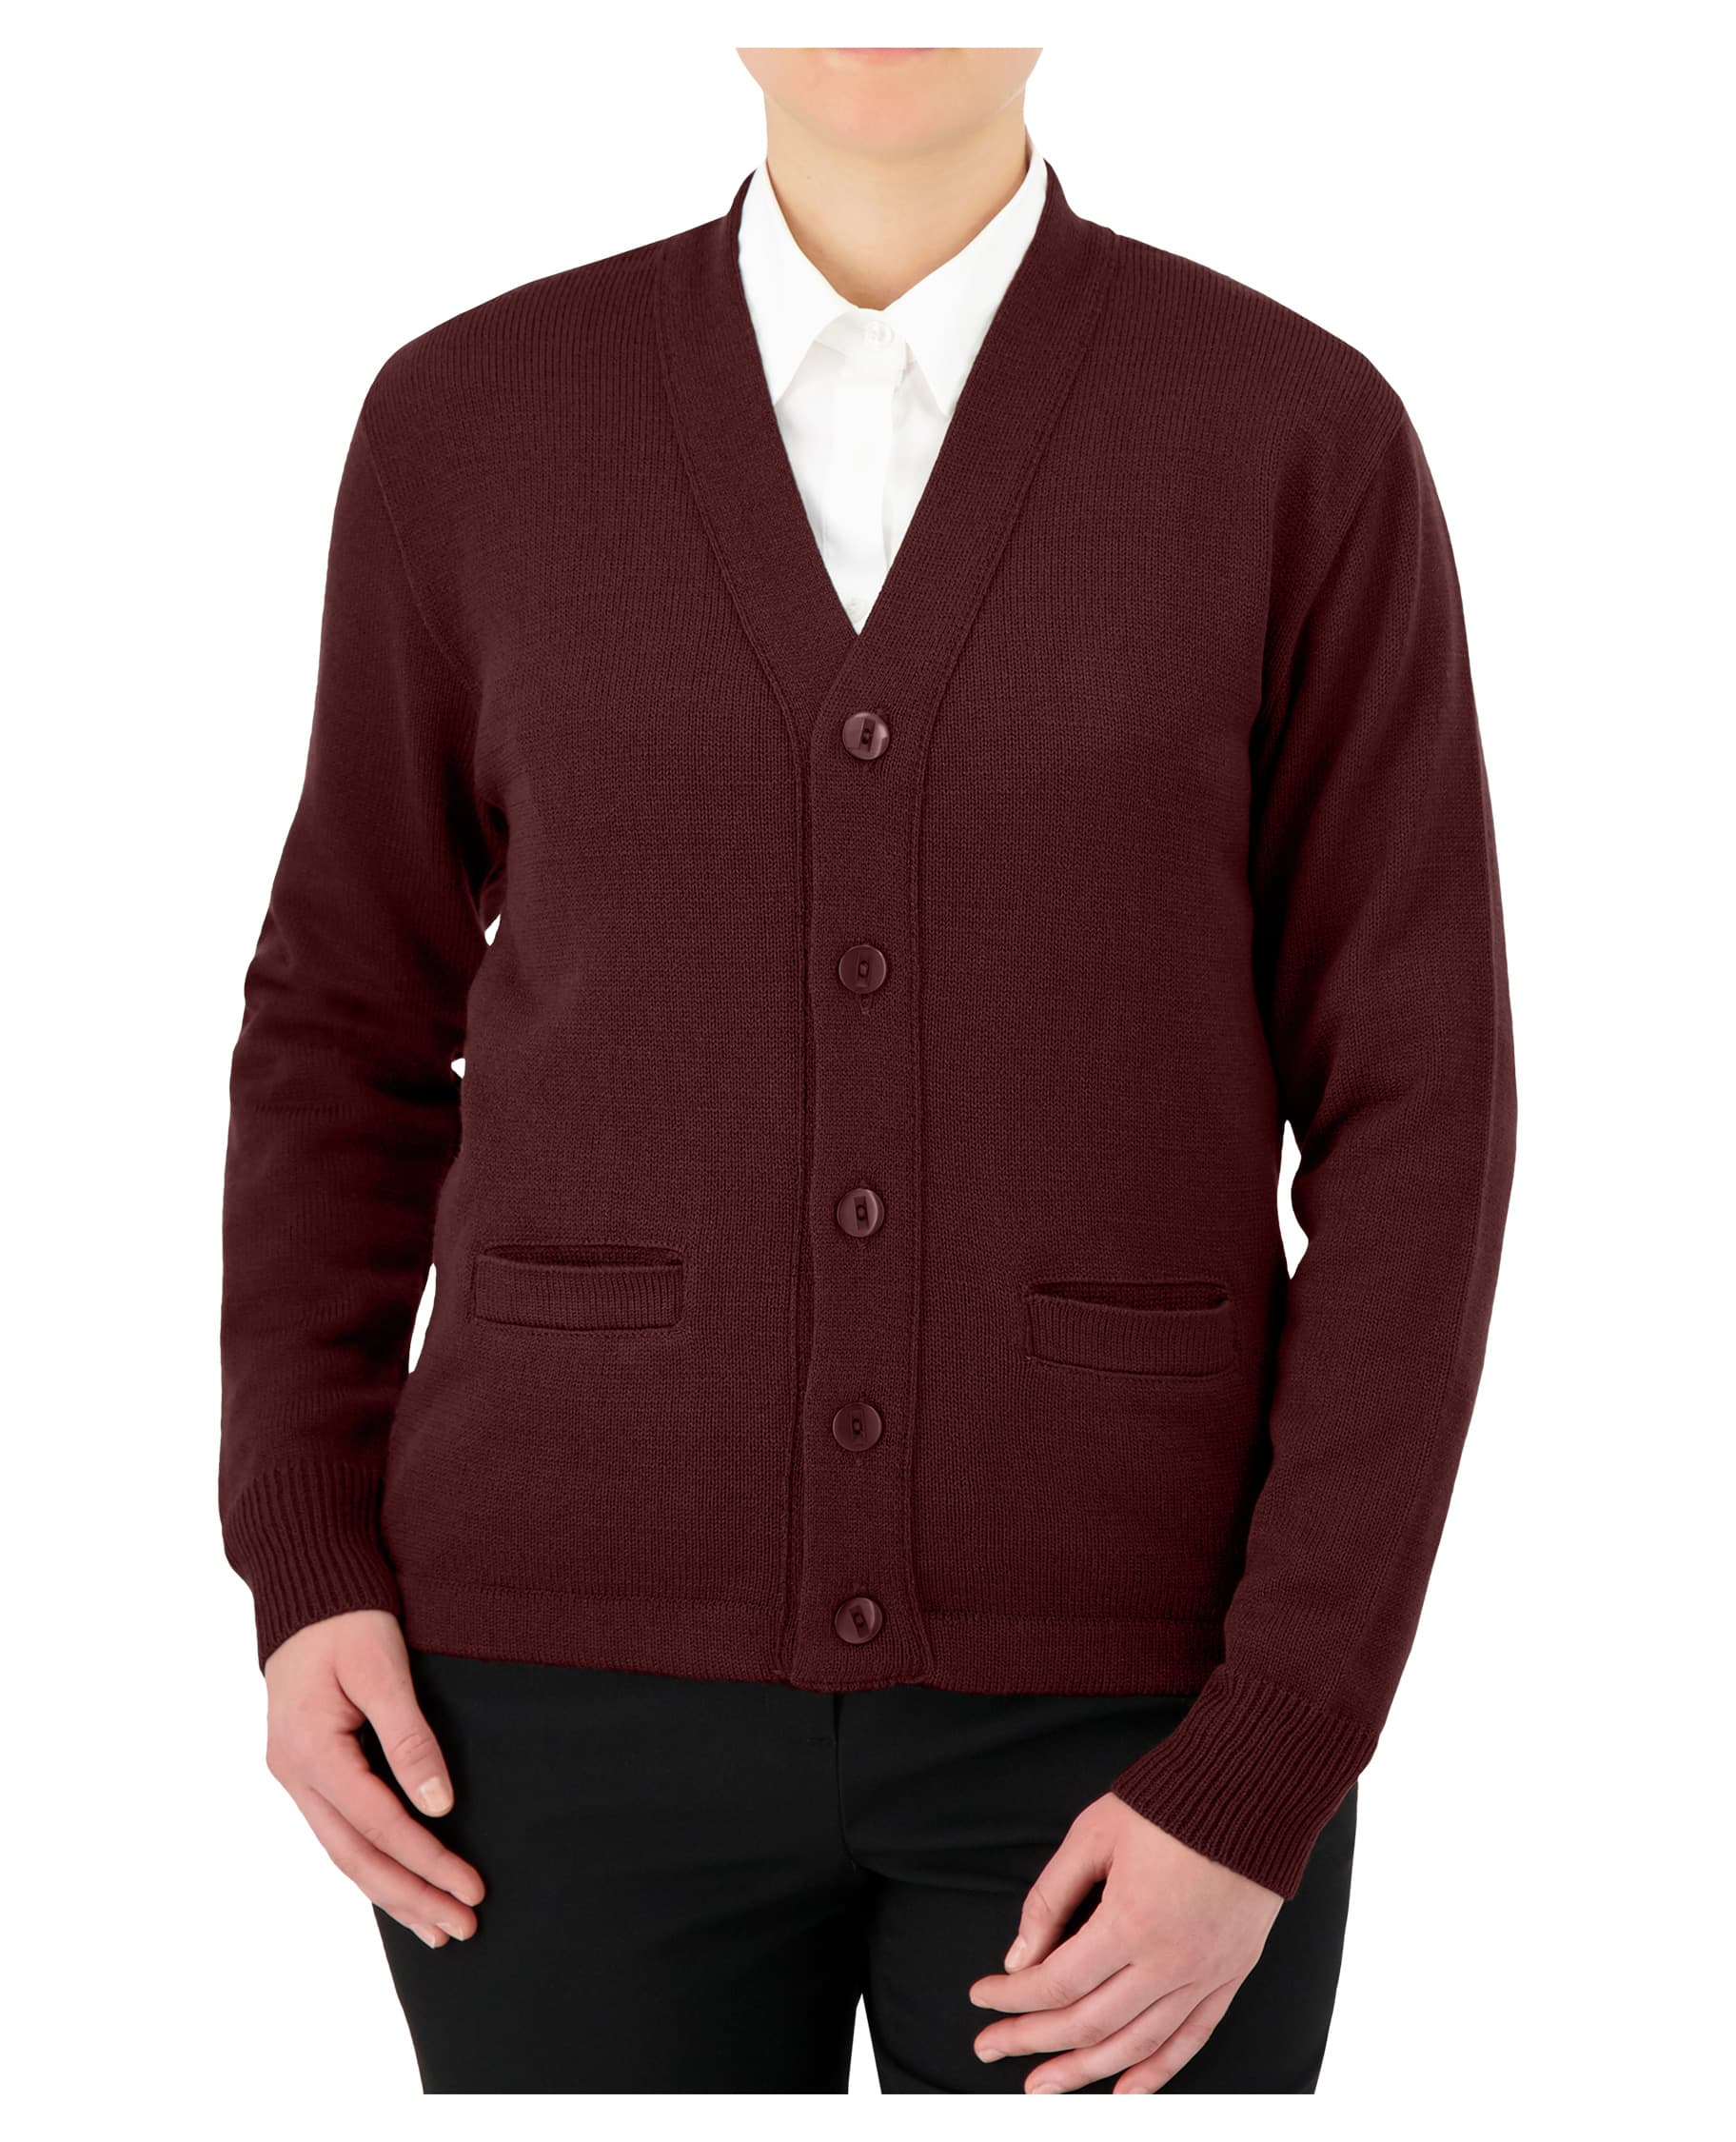 burgundy v-neck button down cardigan with buttons